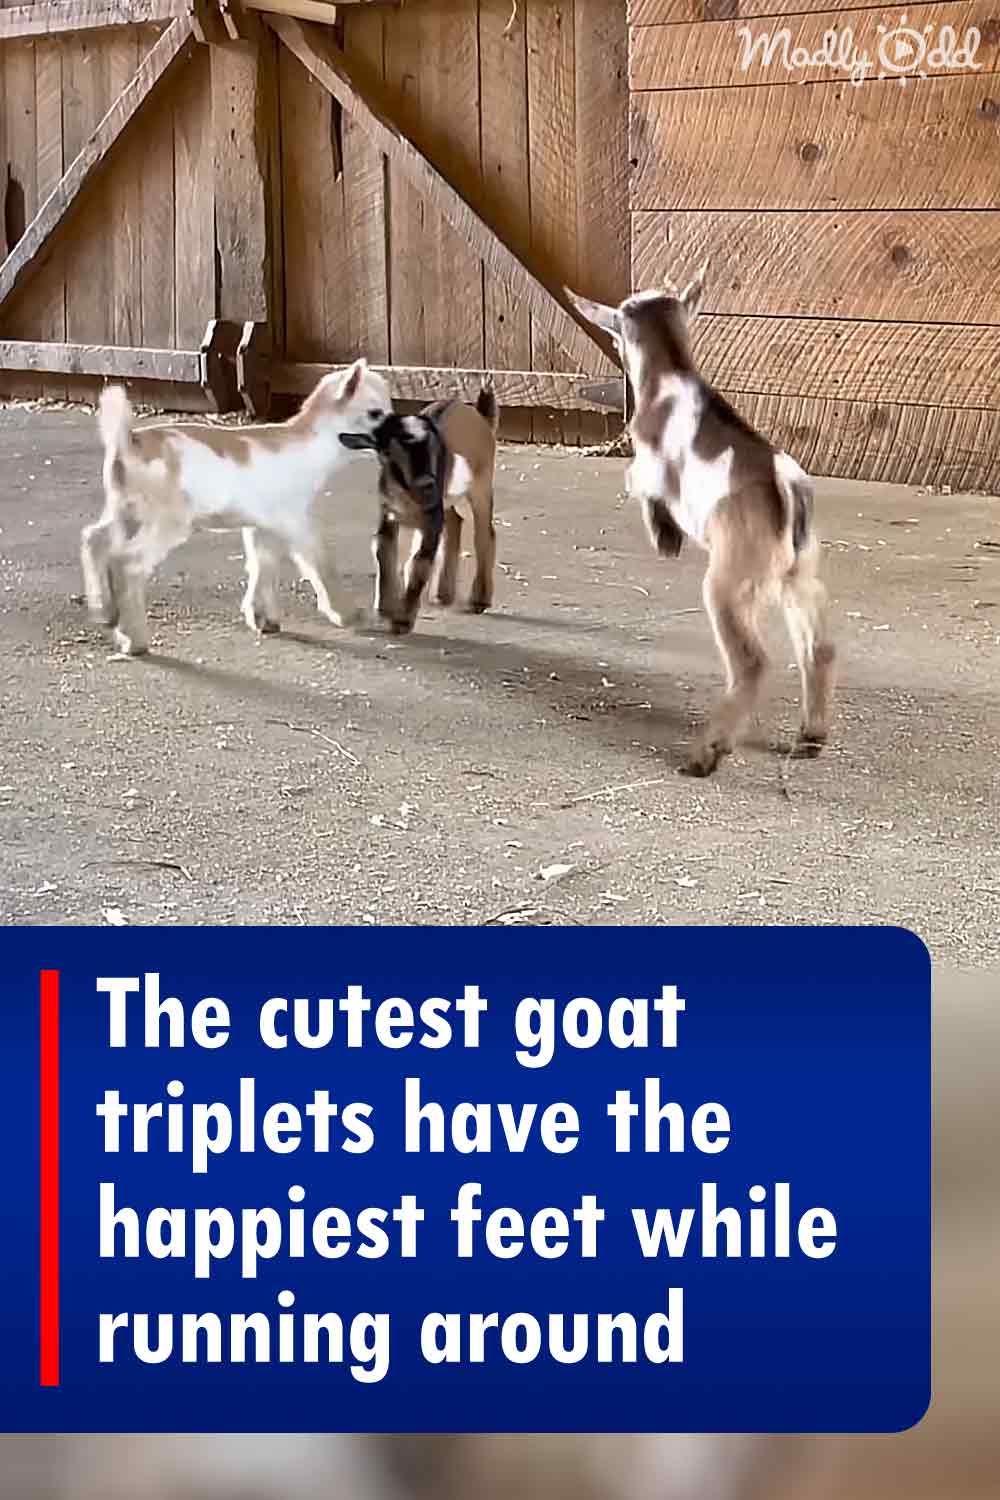 The cutest goat triplets have the happiest feet while running around